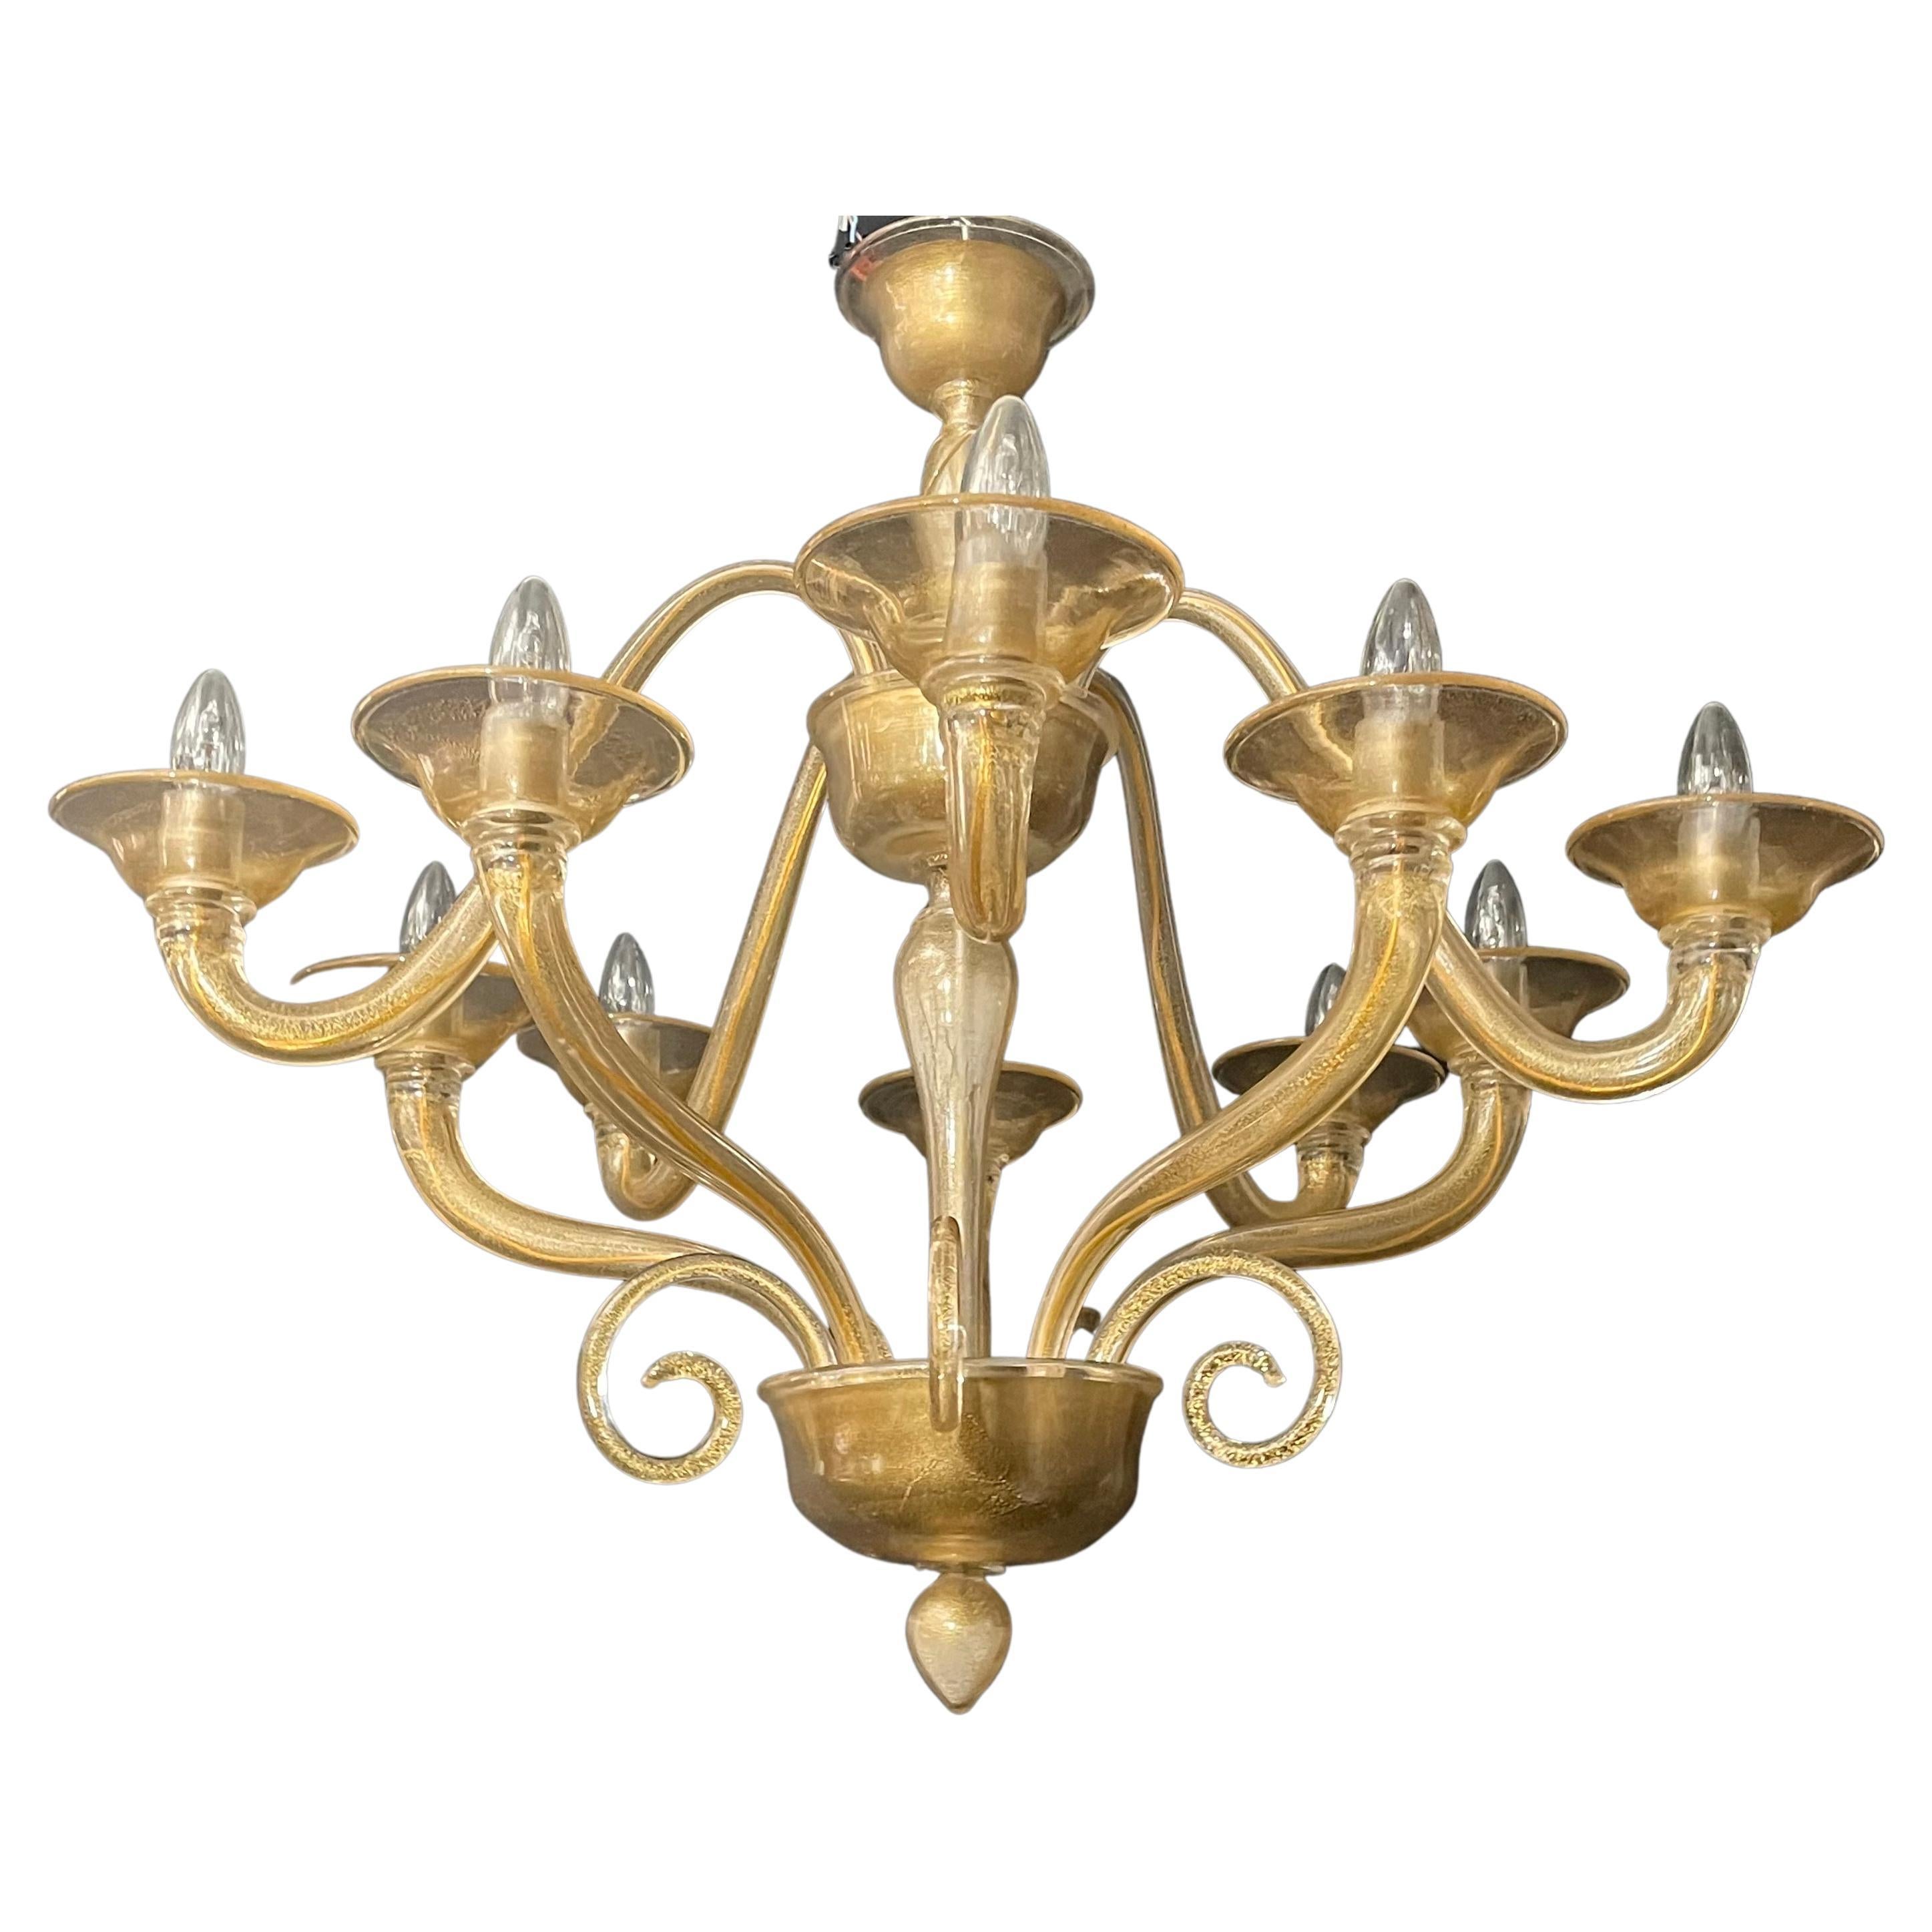 Gold Dusted Handblown Murano Glass Chandelier by Seguso, circa 1960s For Sale